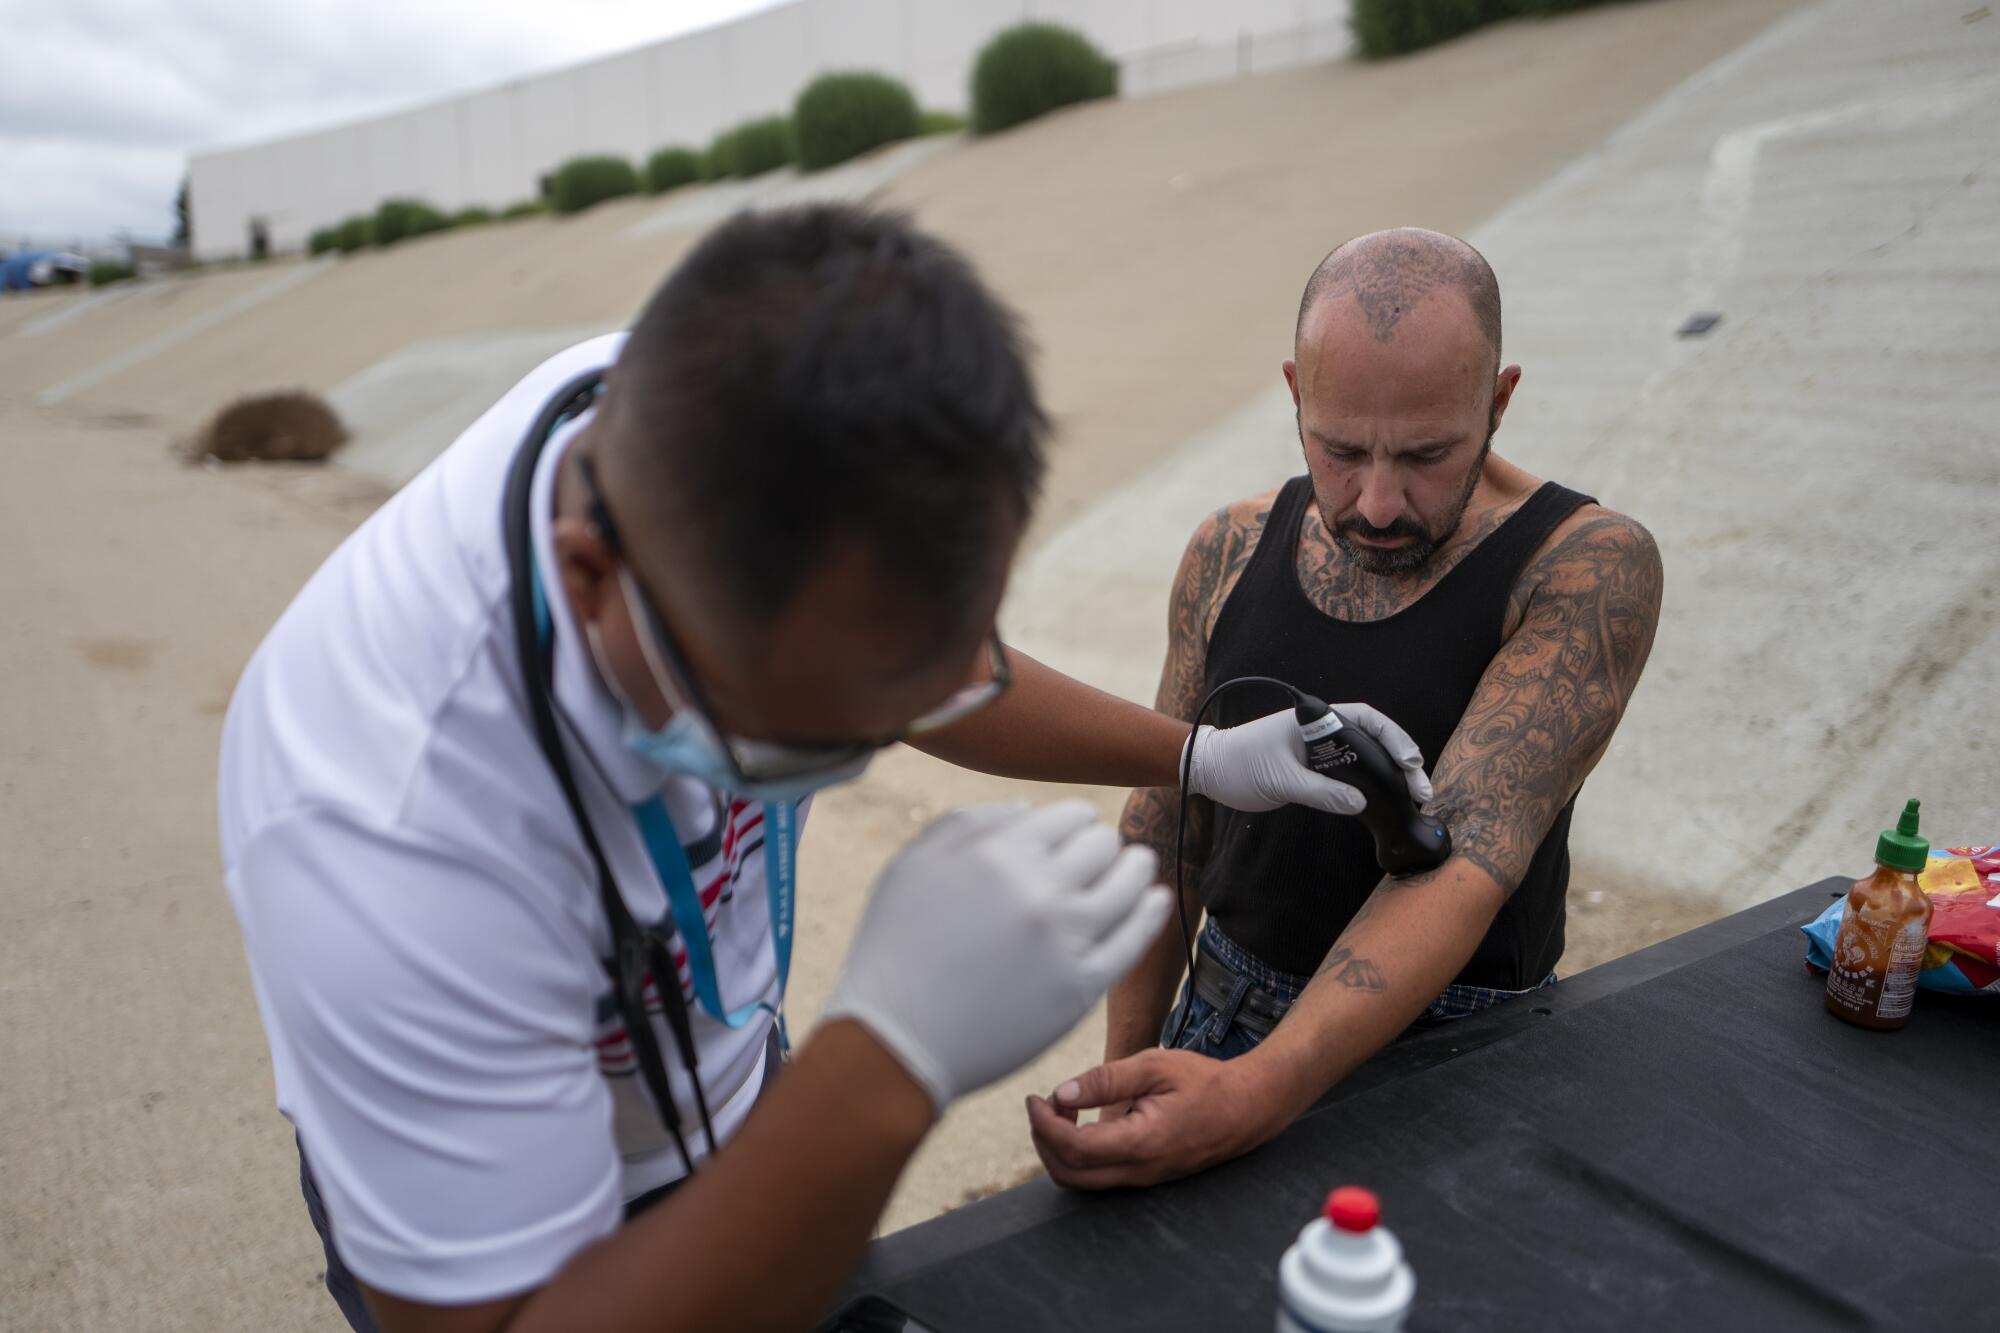 Dr. Absalon Galat, left, uses a portable ultrasound connected to his mobile phone to examine Roy Ramos.